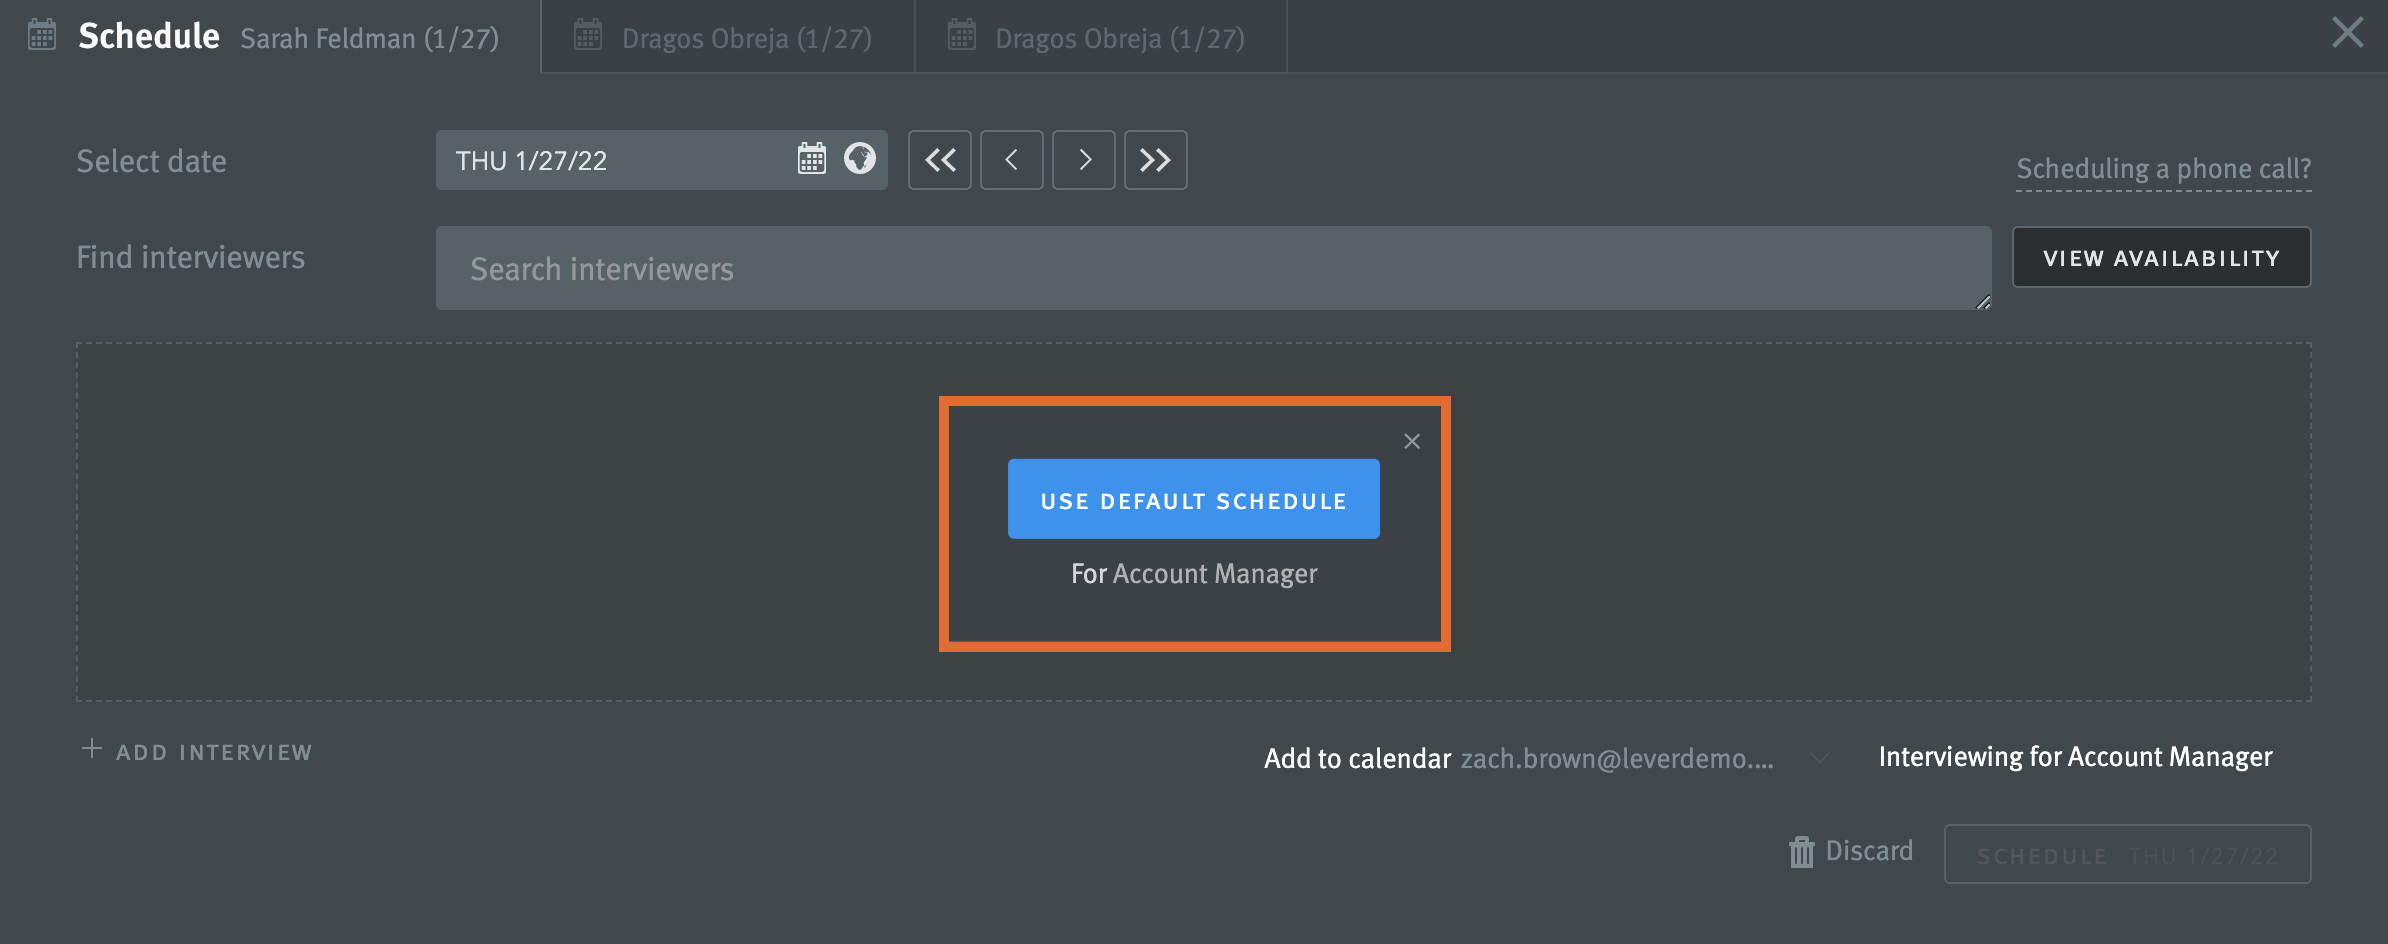 Modal in scheduler with arrow pointing to Use Default Schedule button